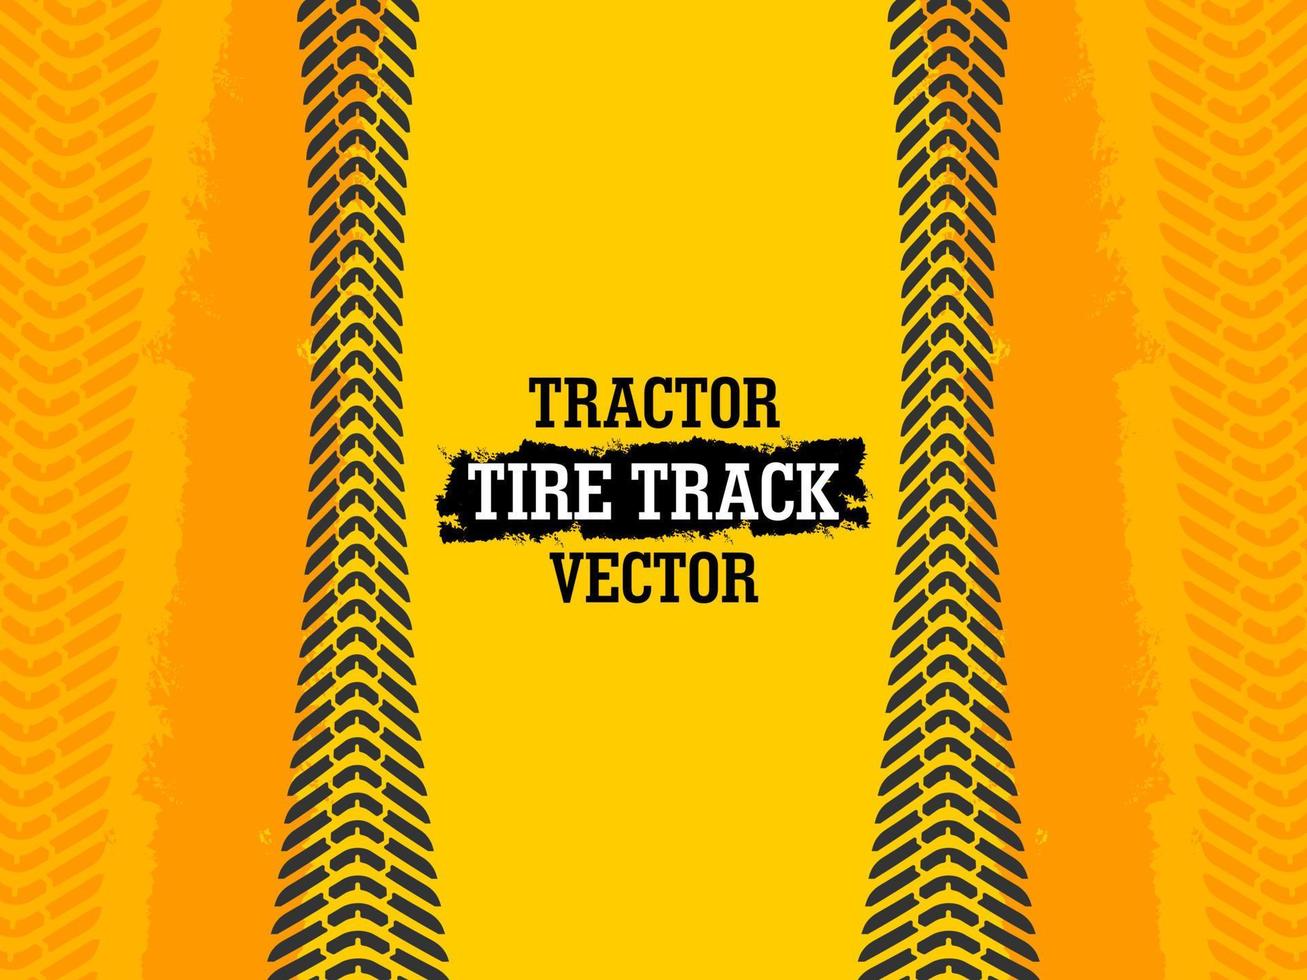 Tractor tire print mark background vector